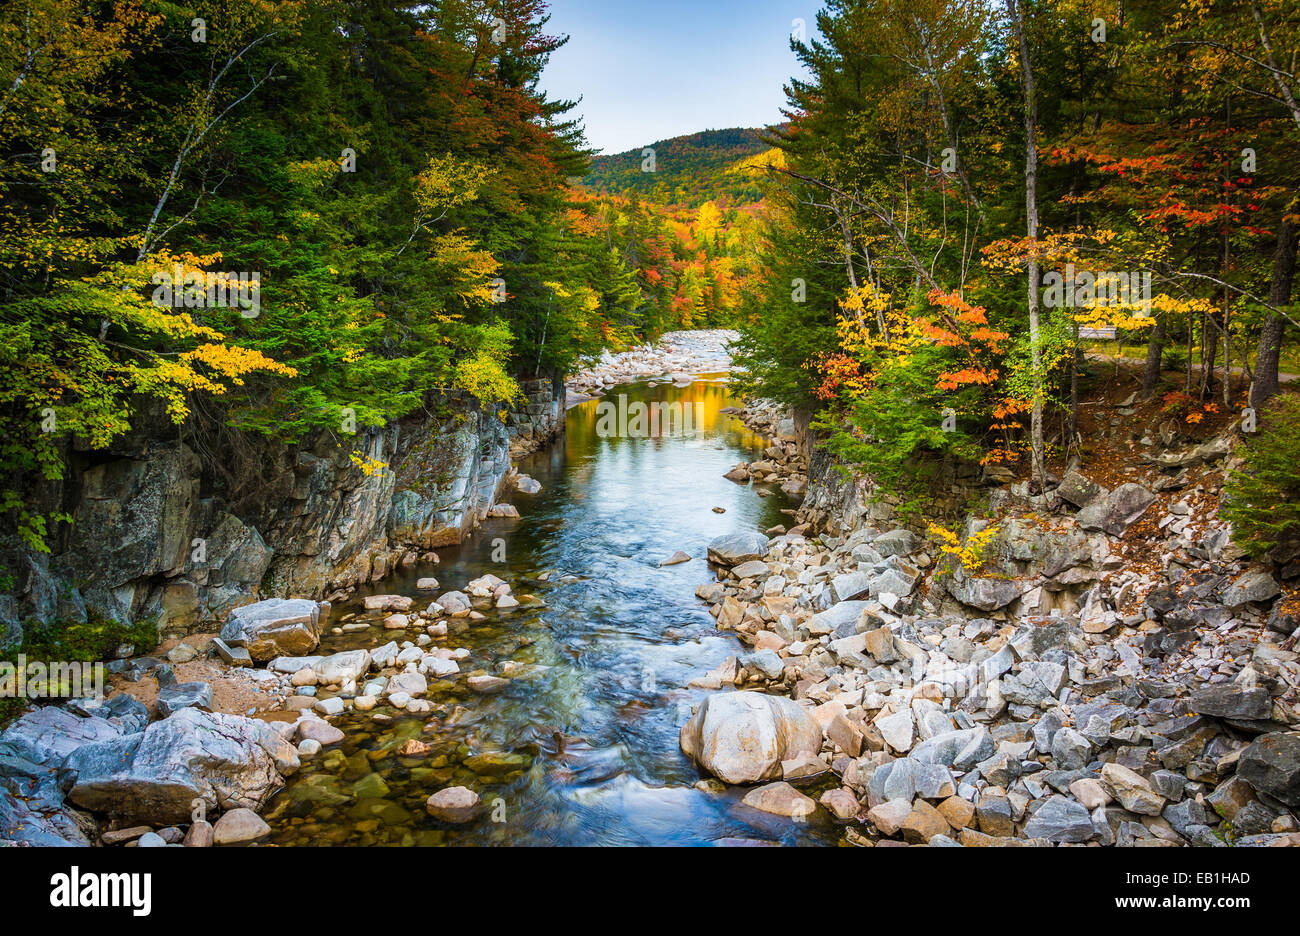 Autumn color and the Swift River at Rocky Gorge, on the Kancamagus Highway, in White Mountain National Forest, New Hampshire. Stock Photo